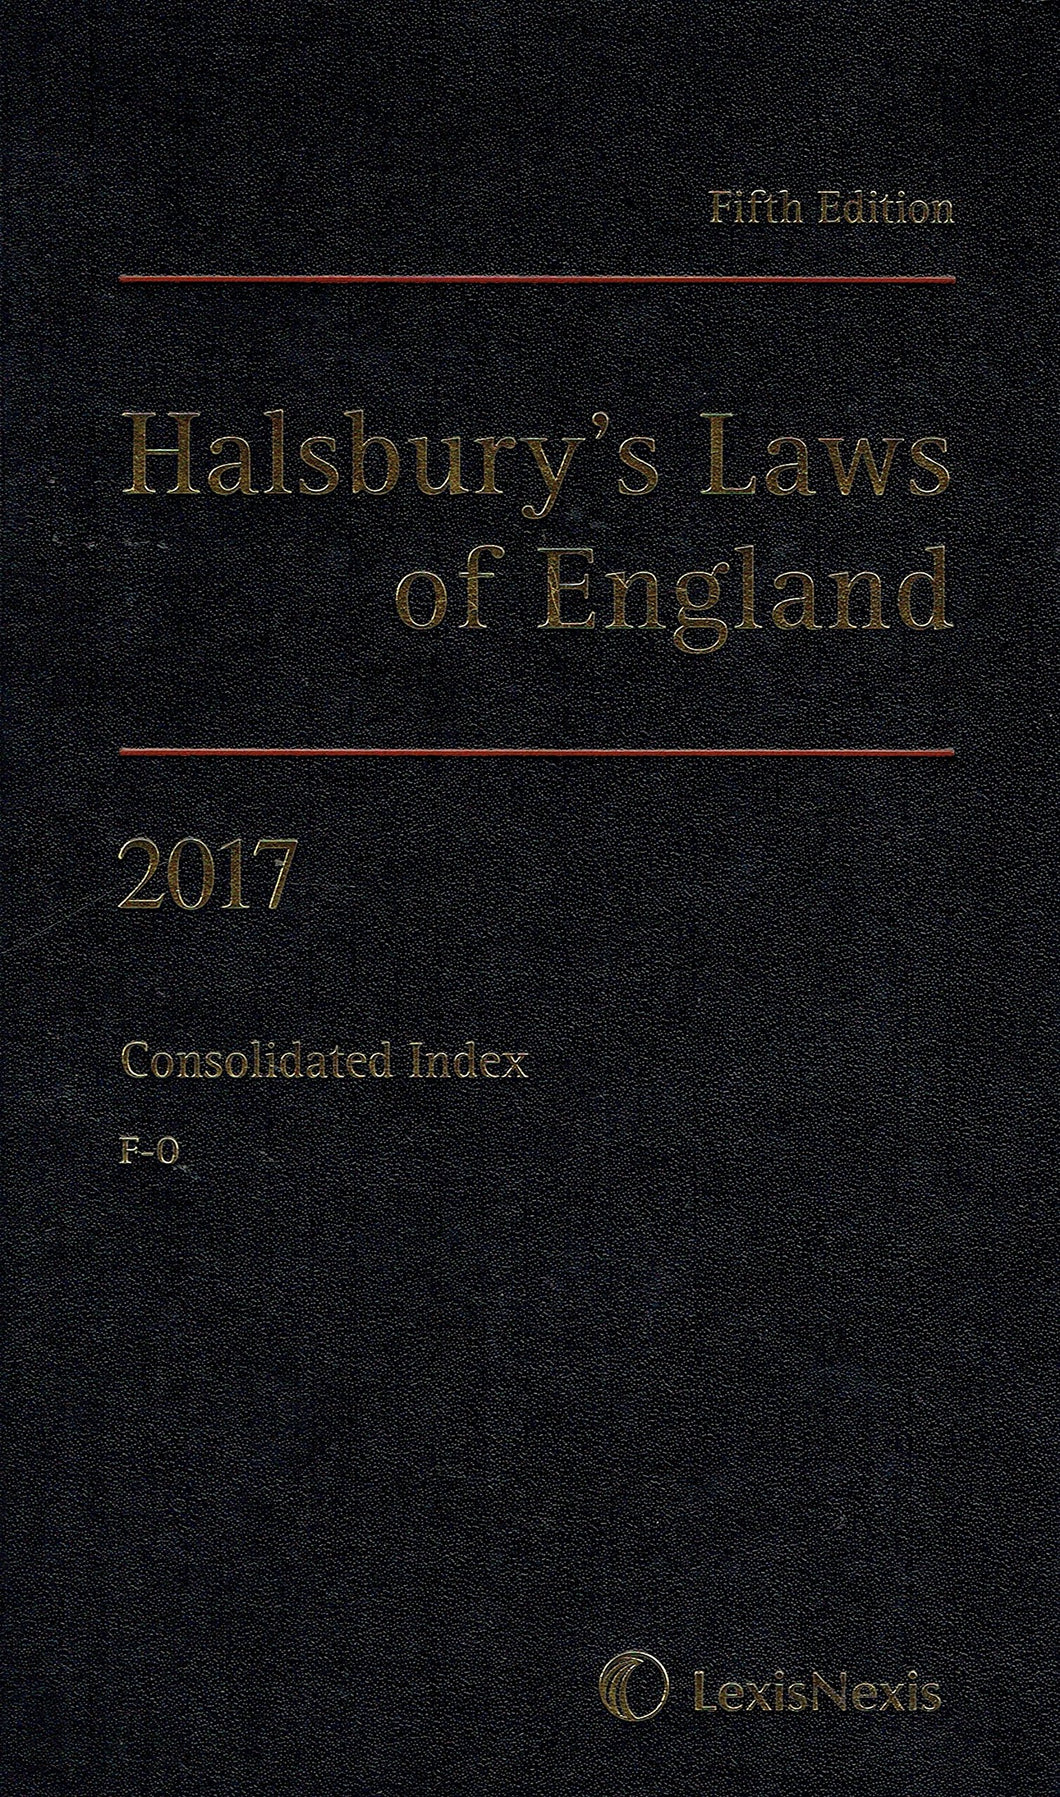 Halsbury's Laws of England - Fifth Edition, 2017: Consolidated Index, F-O